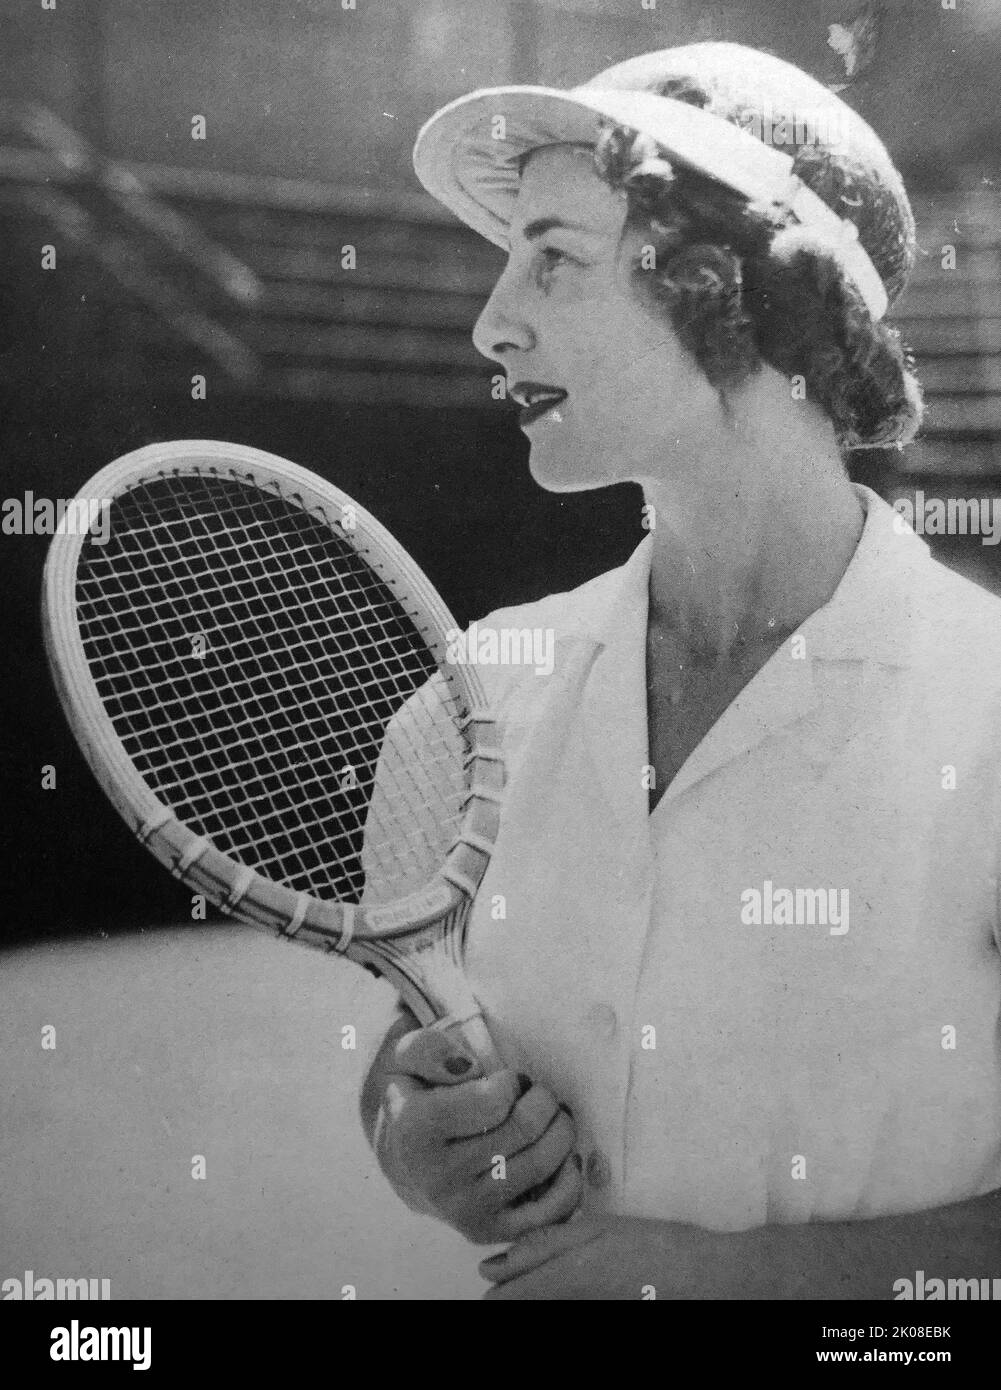 Helen Newington Wills (October 6, 1905 - January 1, 1998), also known by her married names Helen Wills Moody and Helen Wills Roark, was an American tennis player. She won 31 Grand Slam tournament titles (singles, doubles, and mixed doubles) during her career, including 19 singles titles Stock Photo